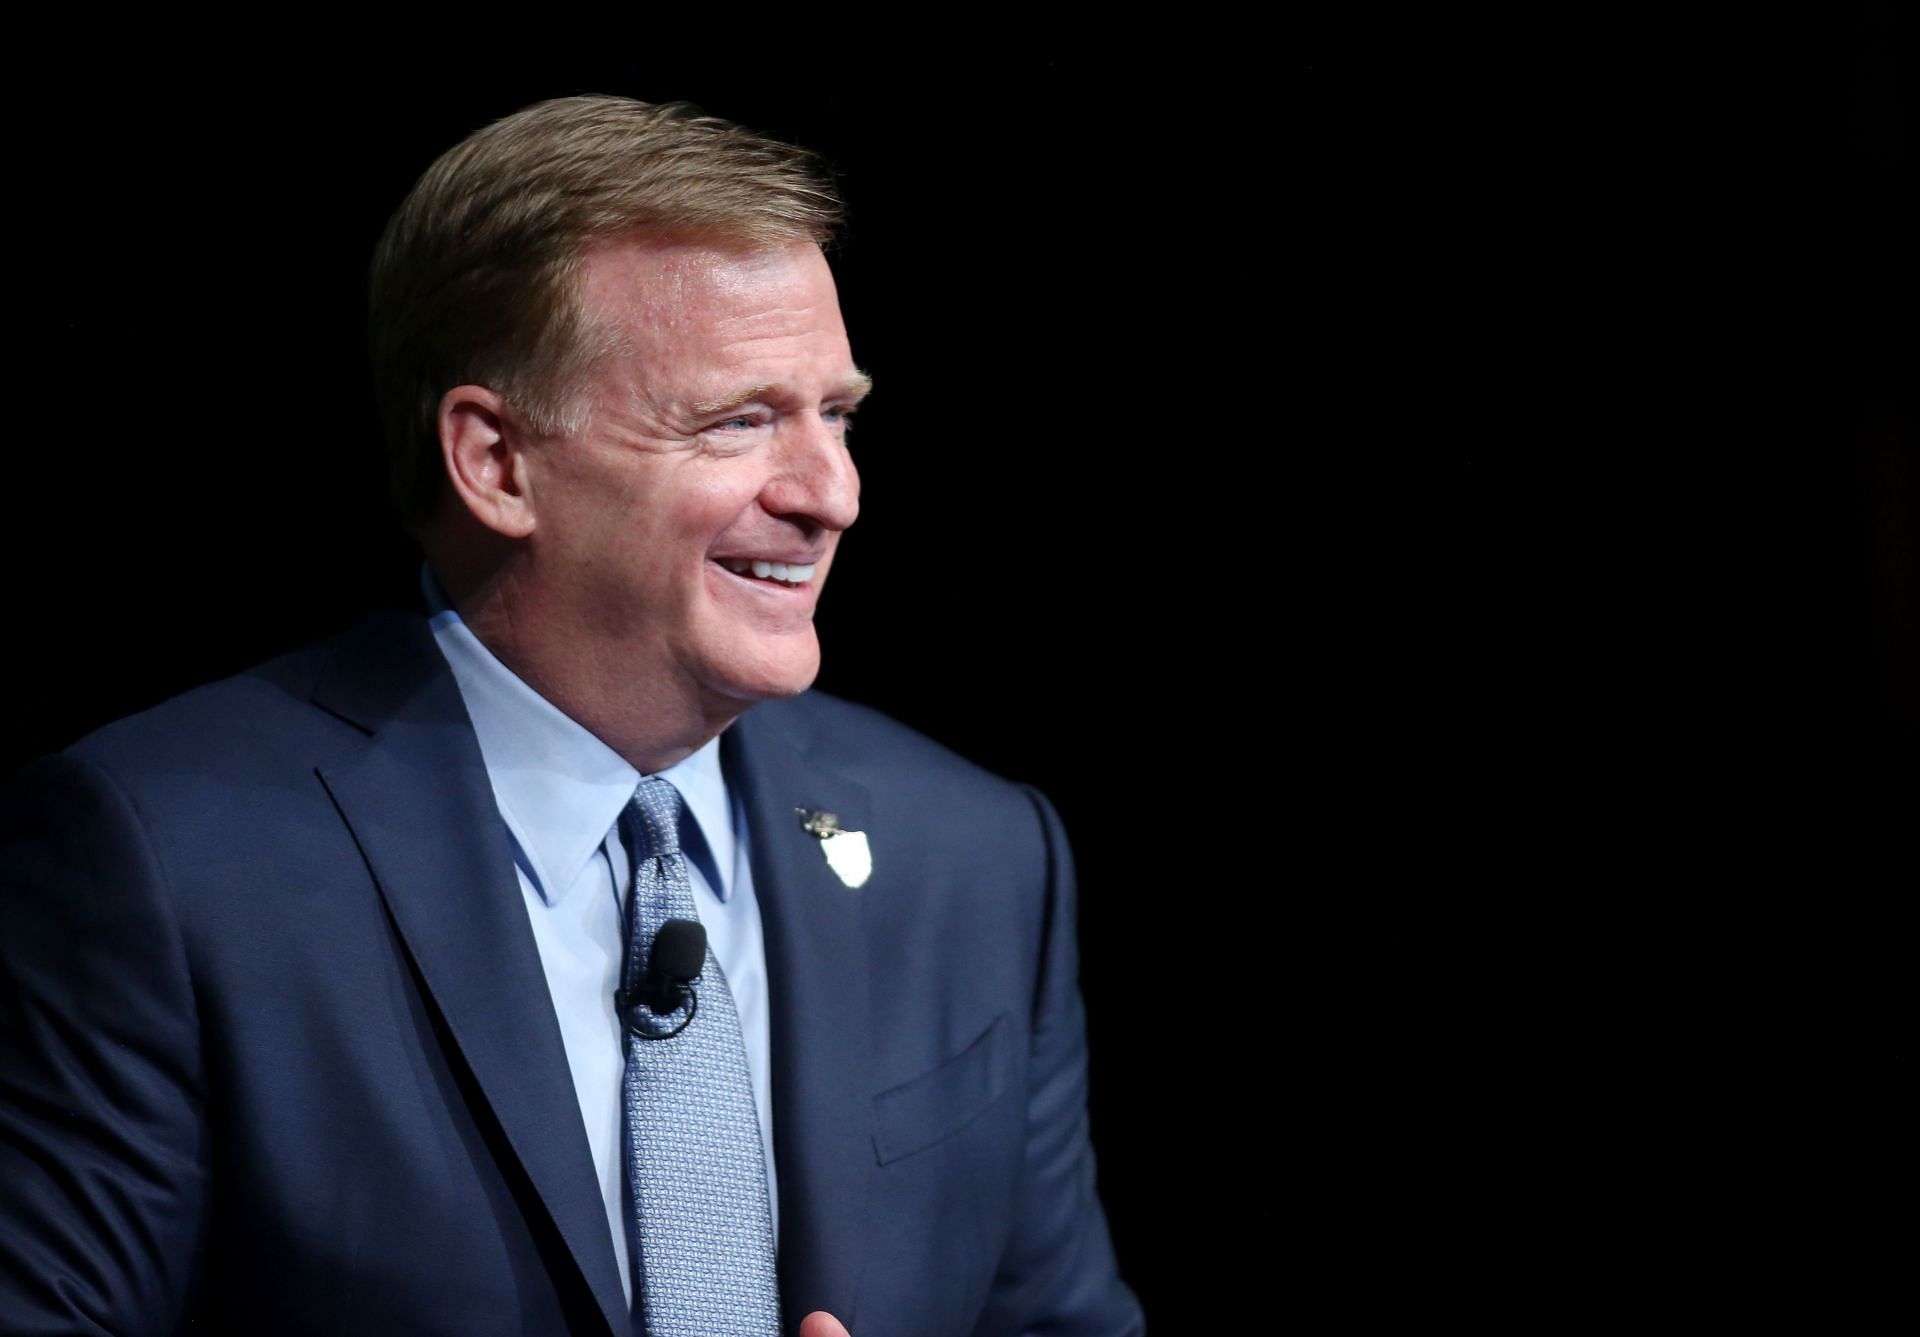 Roger Goodell Speaks At Preview Las Vegas Business Event